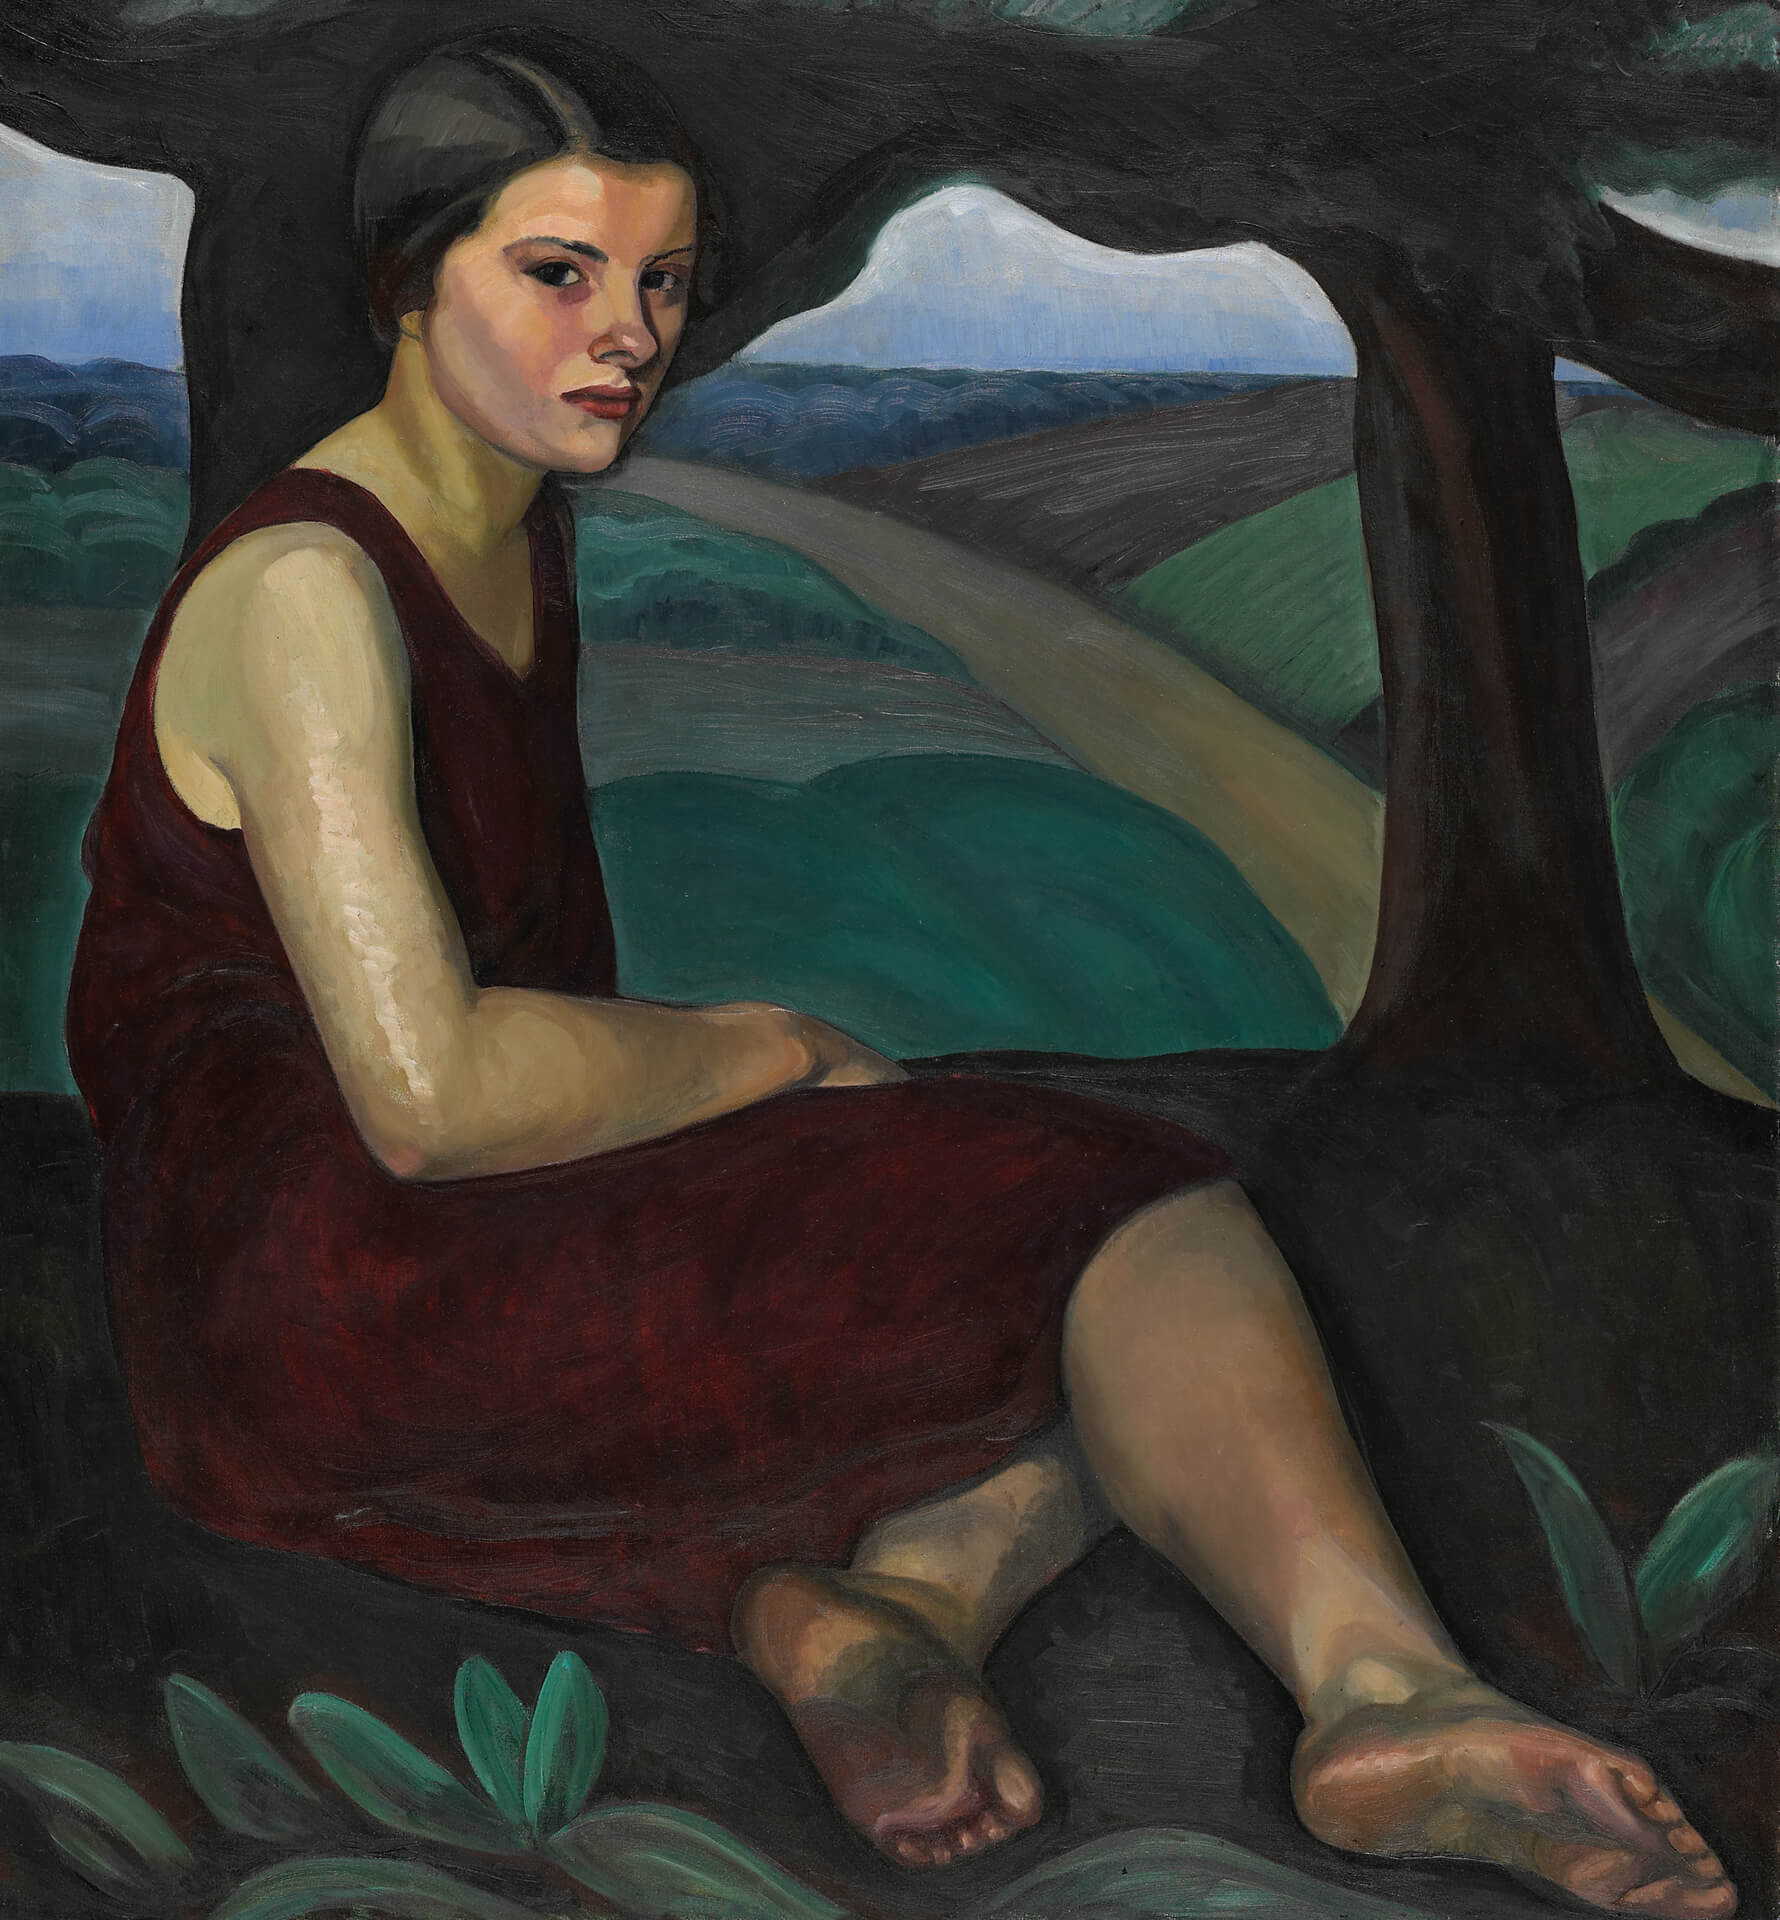 Prudence Heward, Girl on a Hill, 1928